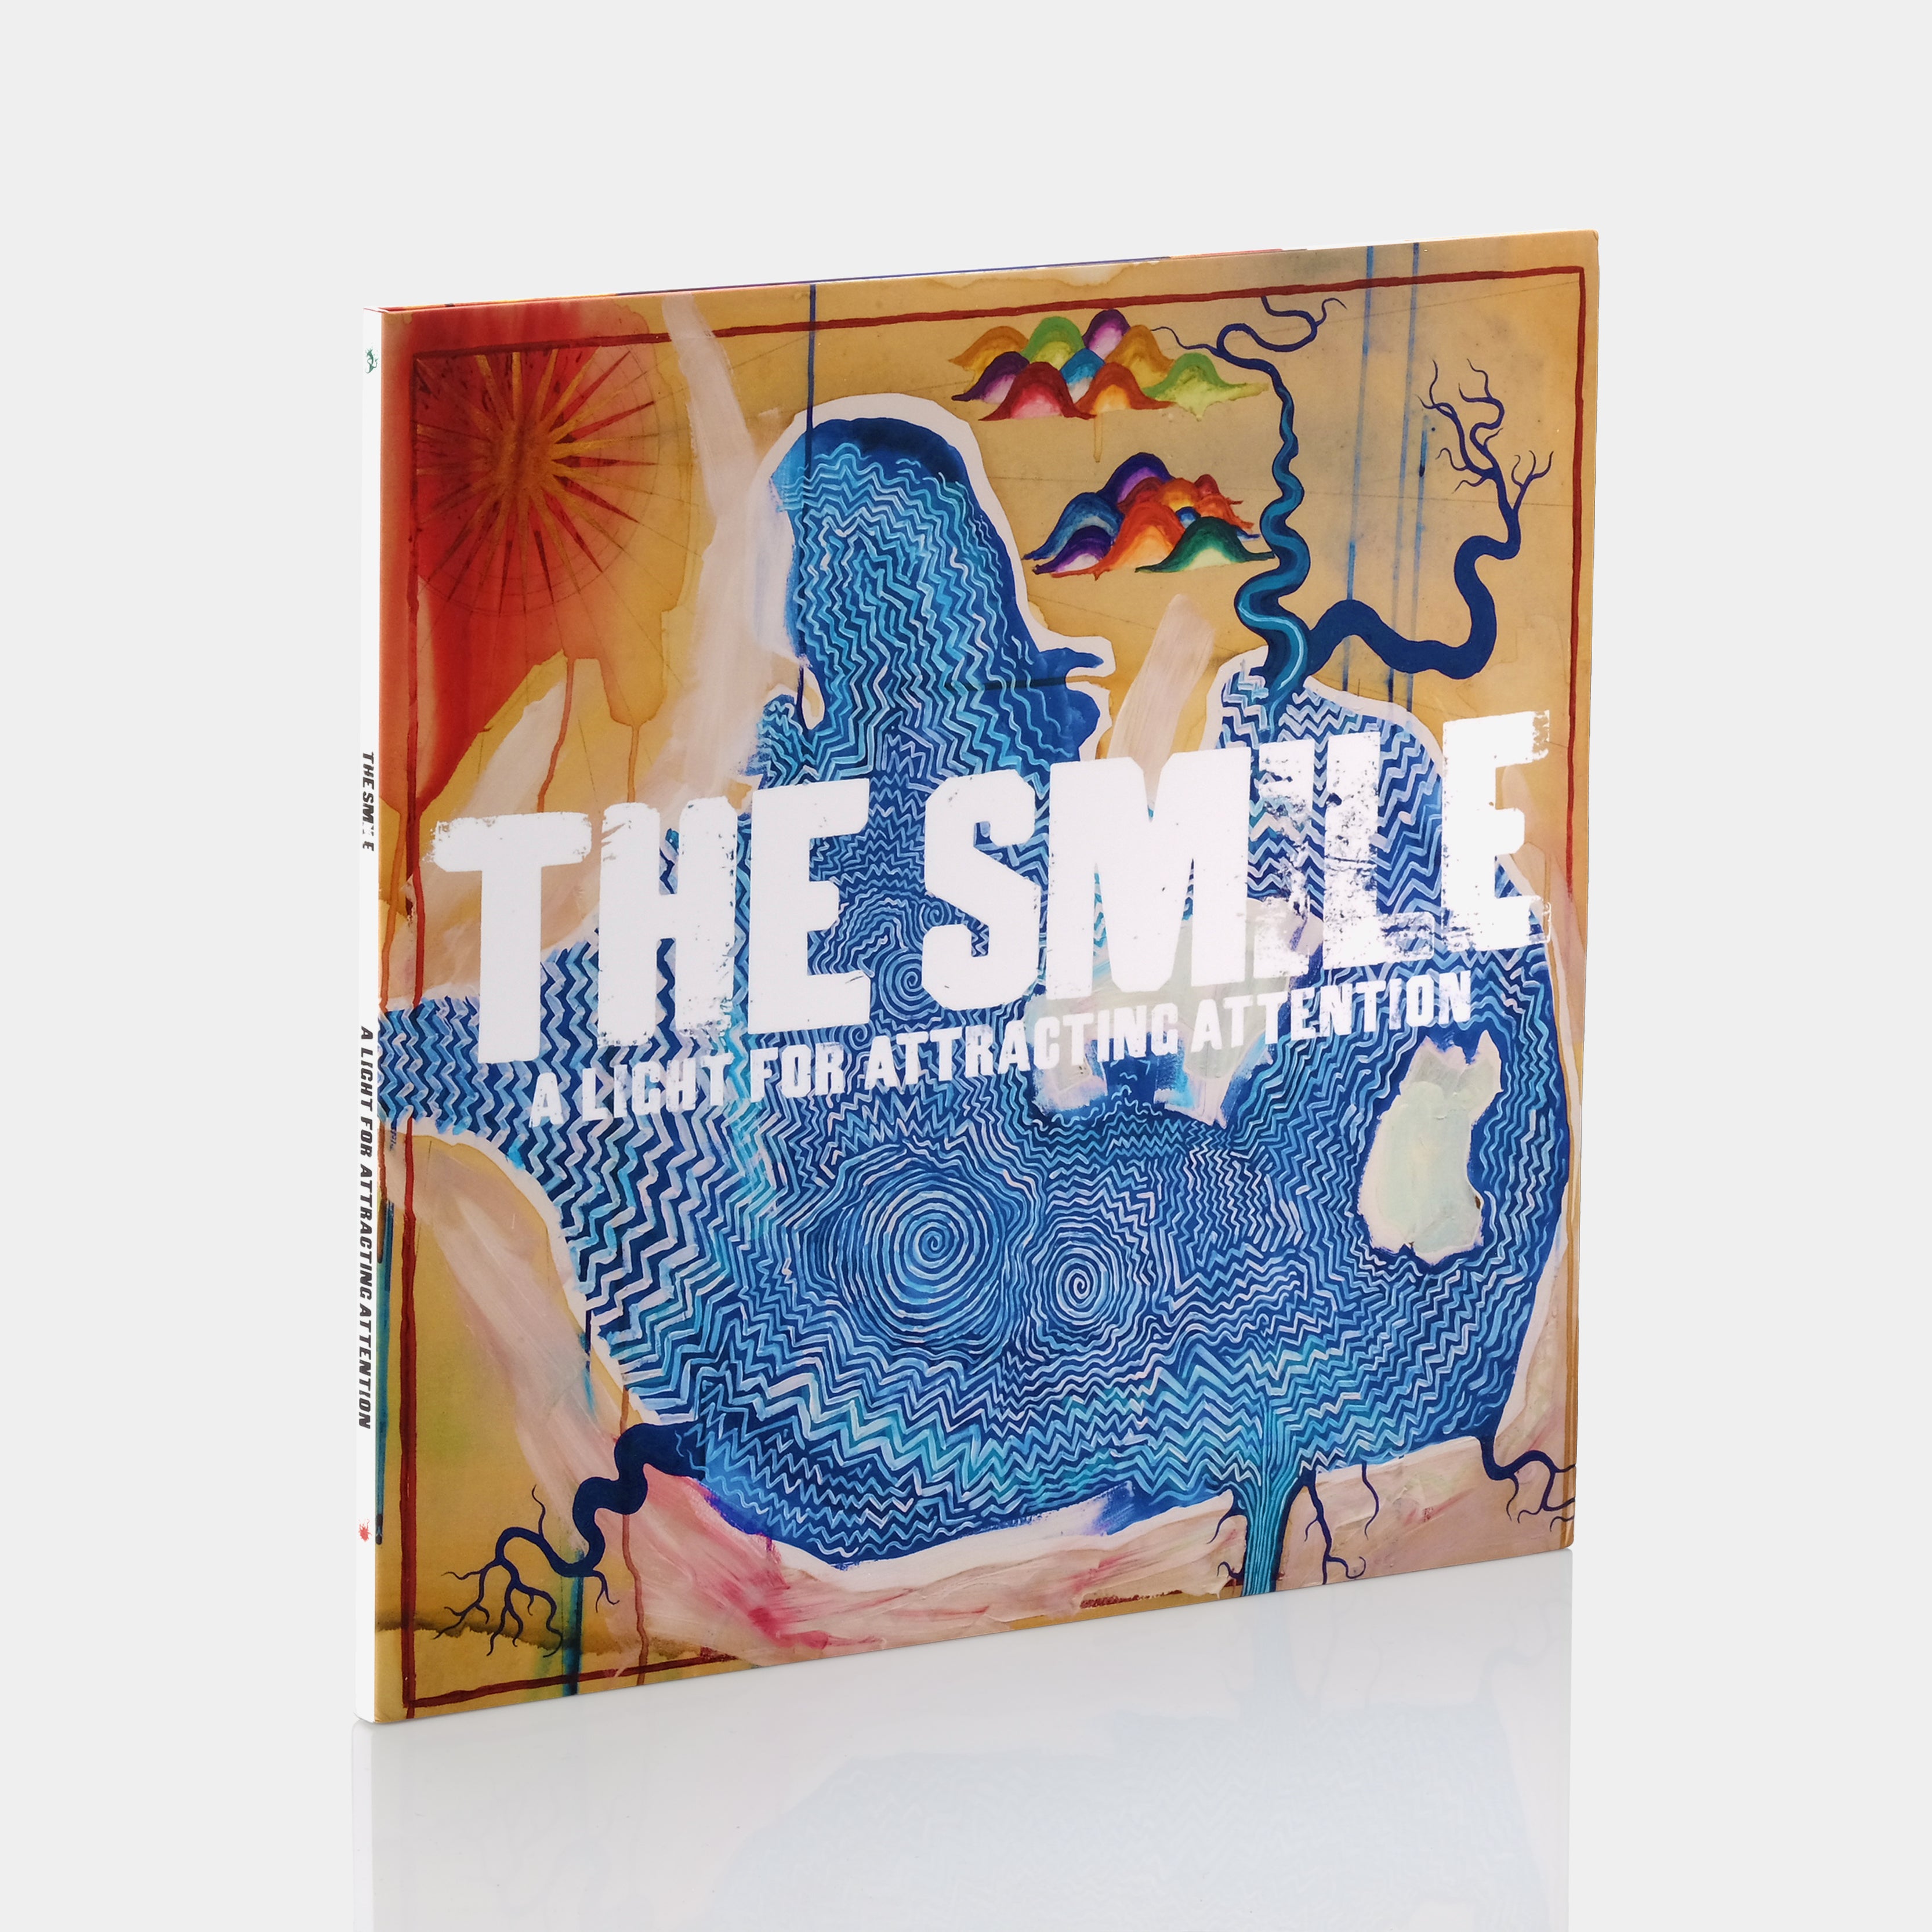 The Smile - A Light For Attracting Attention 2xLP Vinyl Record